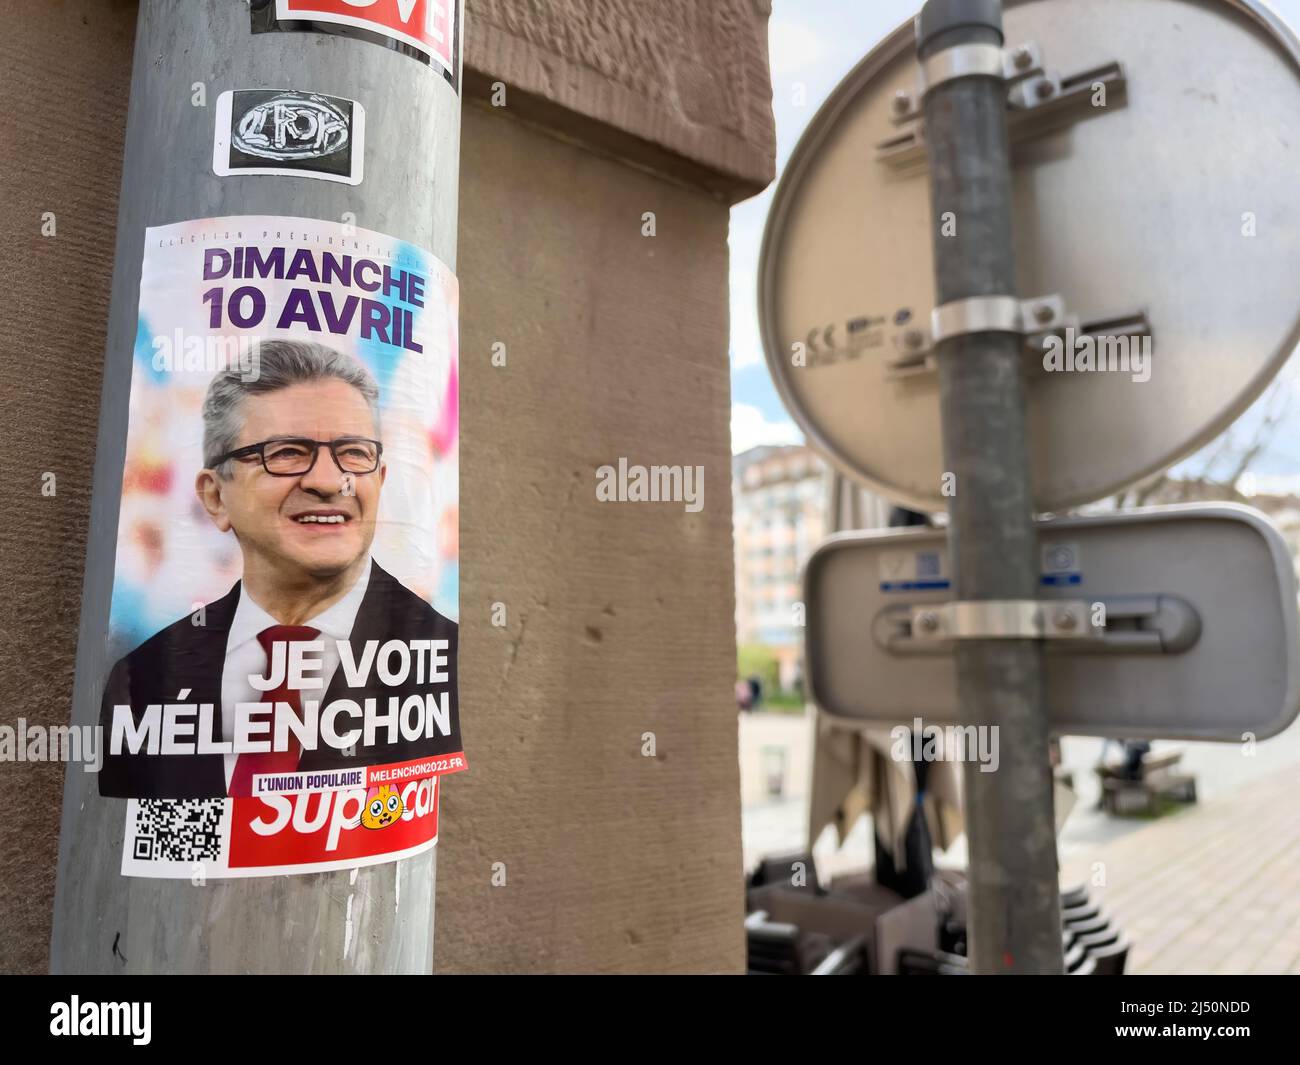 Paris, France - Apr 10 2022: Sunday, 10 April, I vote Melenchon sticker on city building in the day the first round of France 2022 presidential election Stock Photo